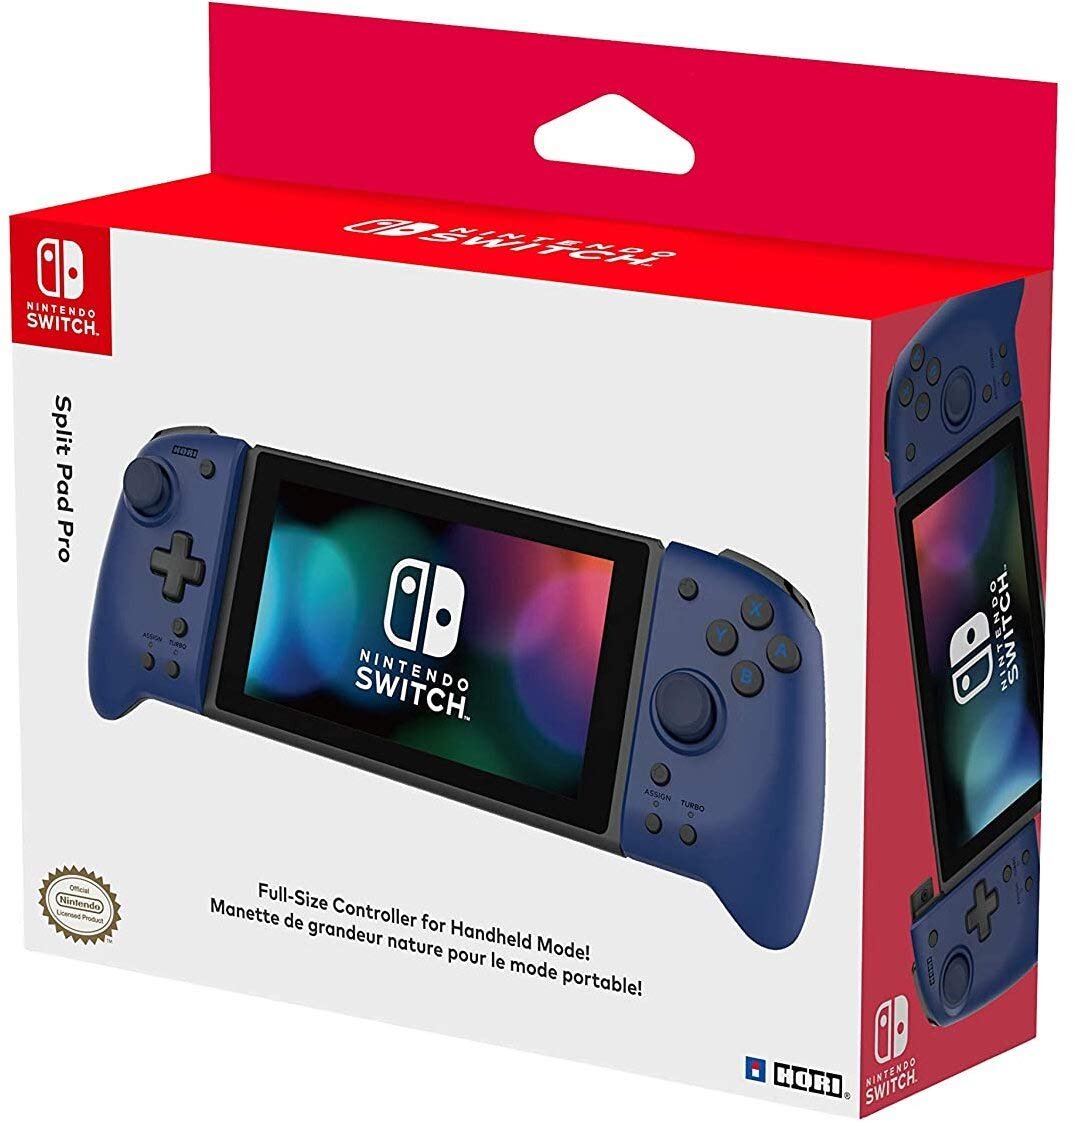 Wario64 on Twitter: "extra 40% off select Amazon Warehouse items on Amazon  (discount at checkout). Video games: https://t.co/1zDqMTw4NZ Everything  else: https://t.co/R5MMmRveek #ad https://t.co/ljkUhQmtOx" / Twitter